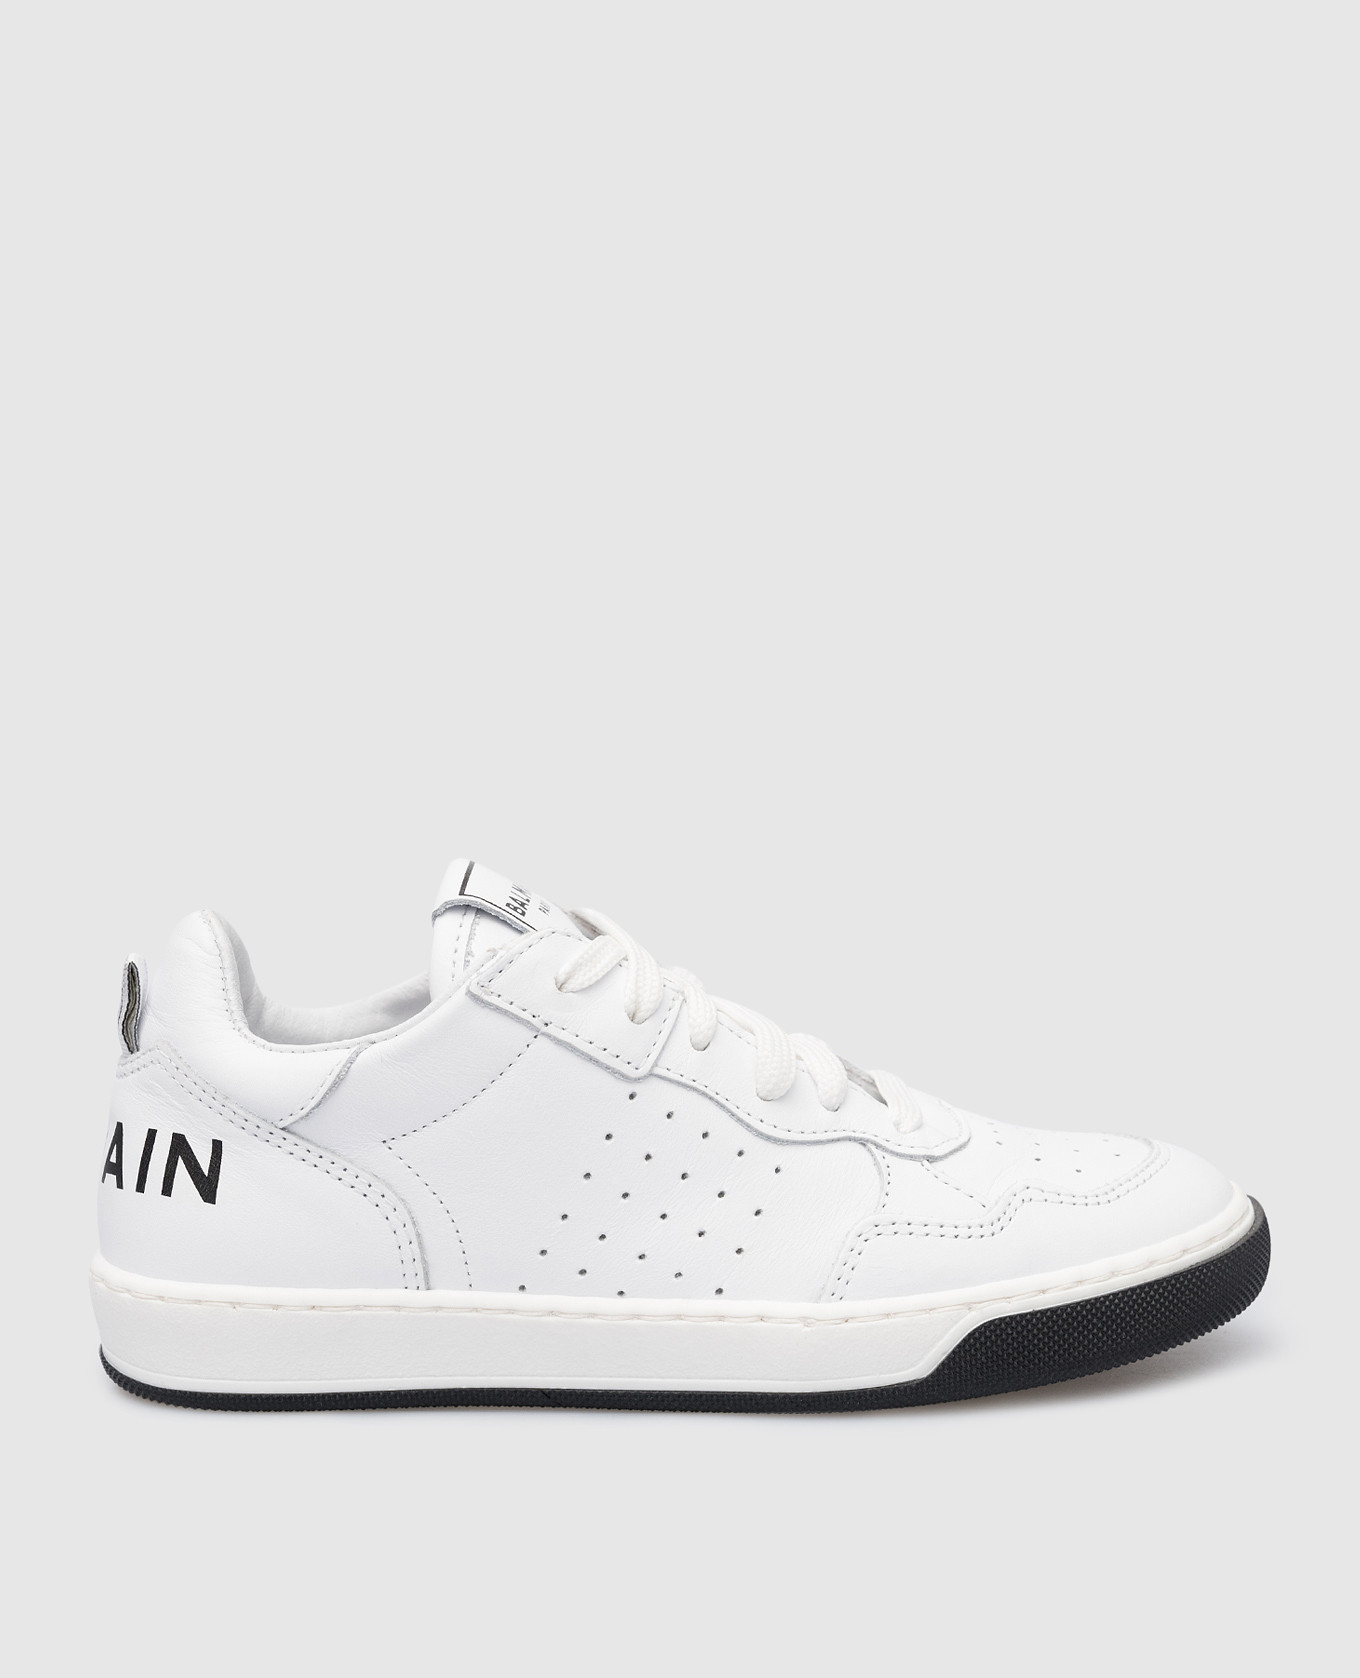 Children's white leather sneakers with contrasting logo